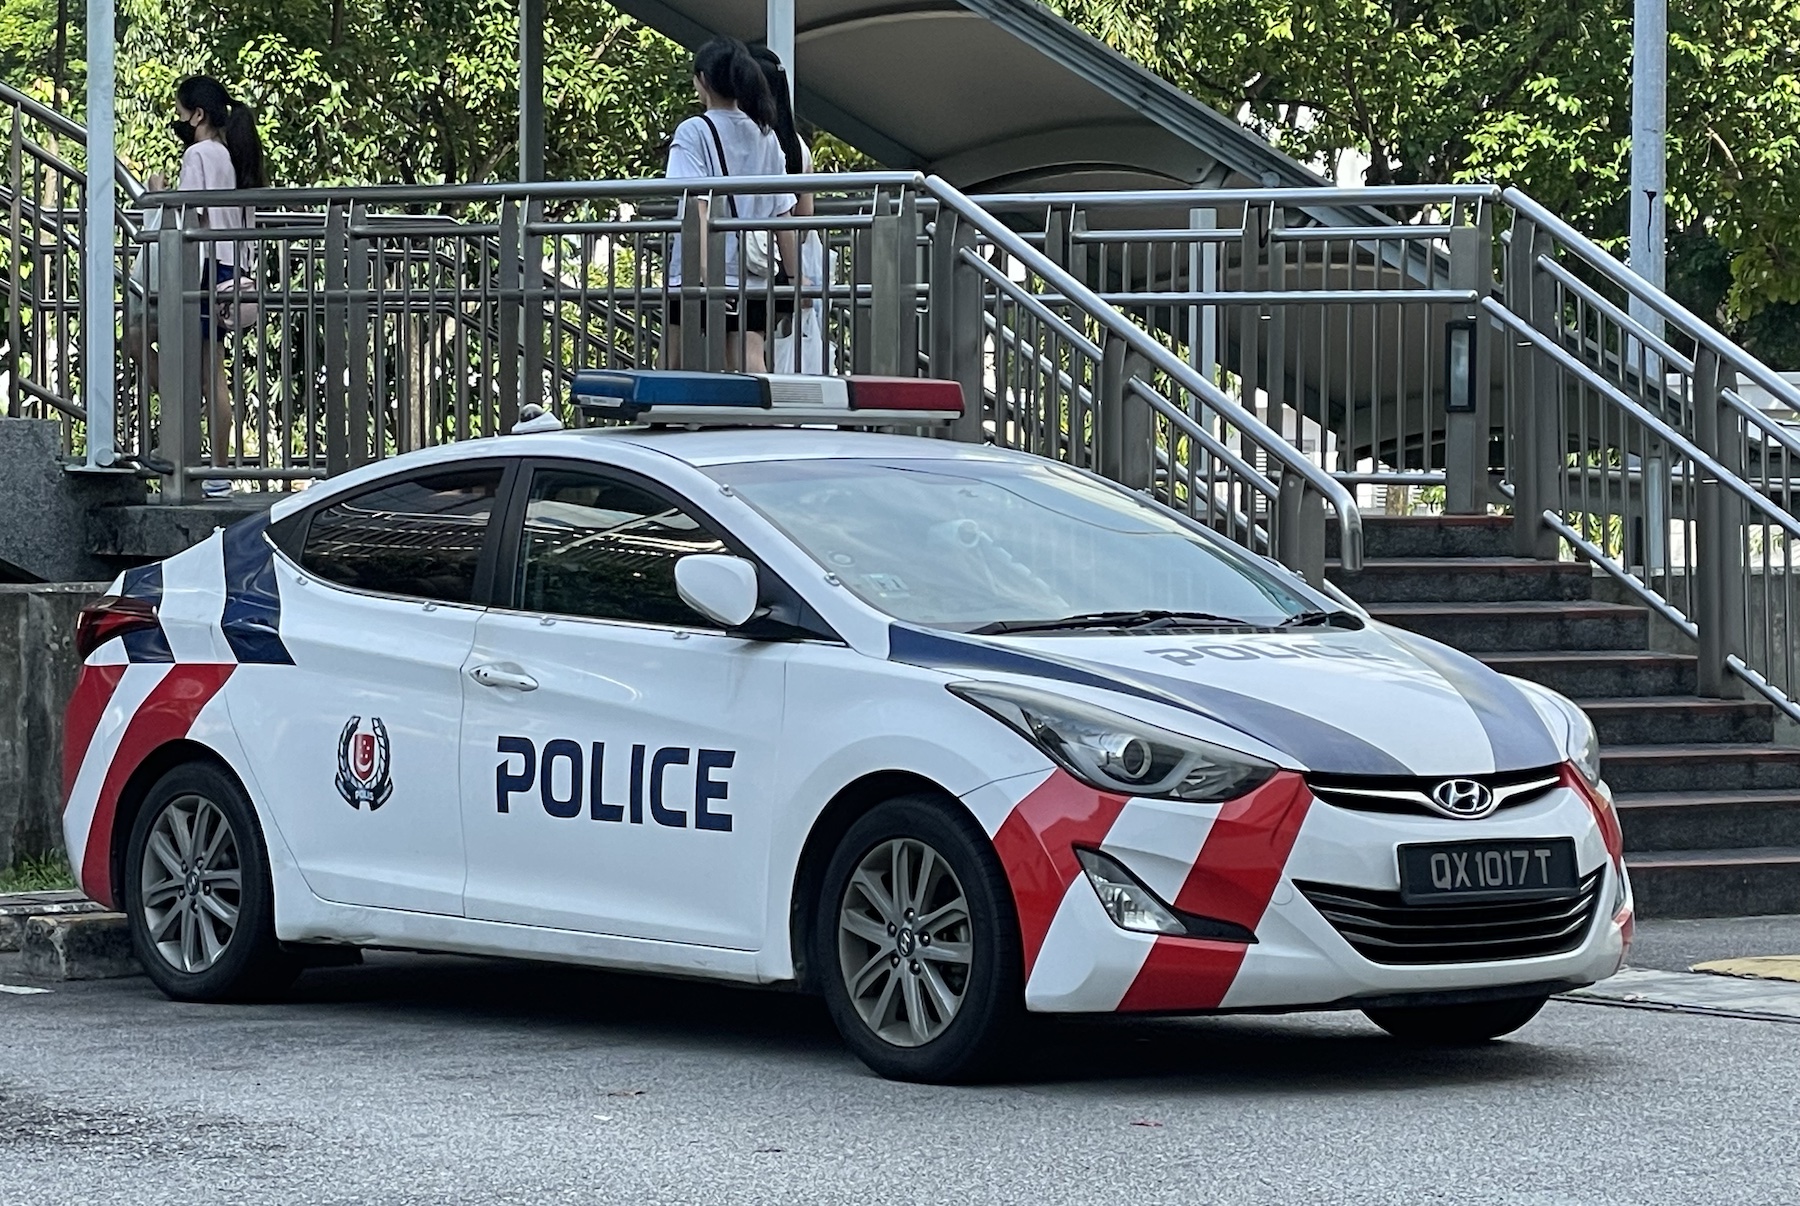 A parked SPF squad car sits outside the IMM Mall, Singapore

